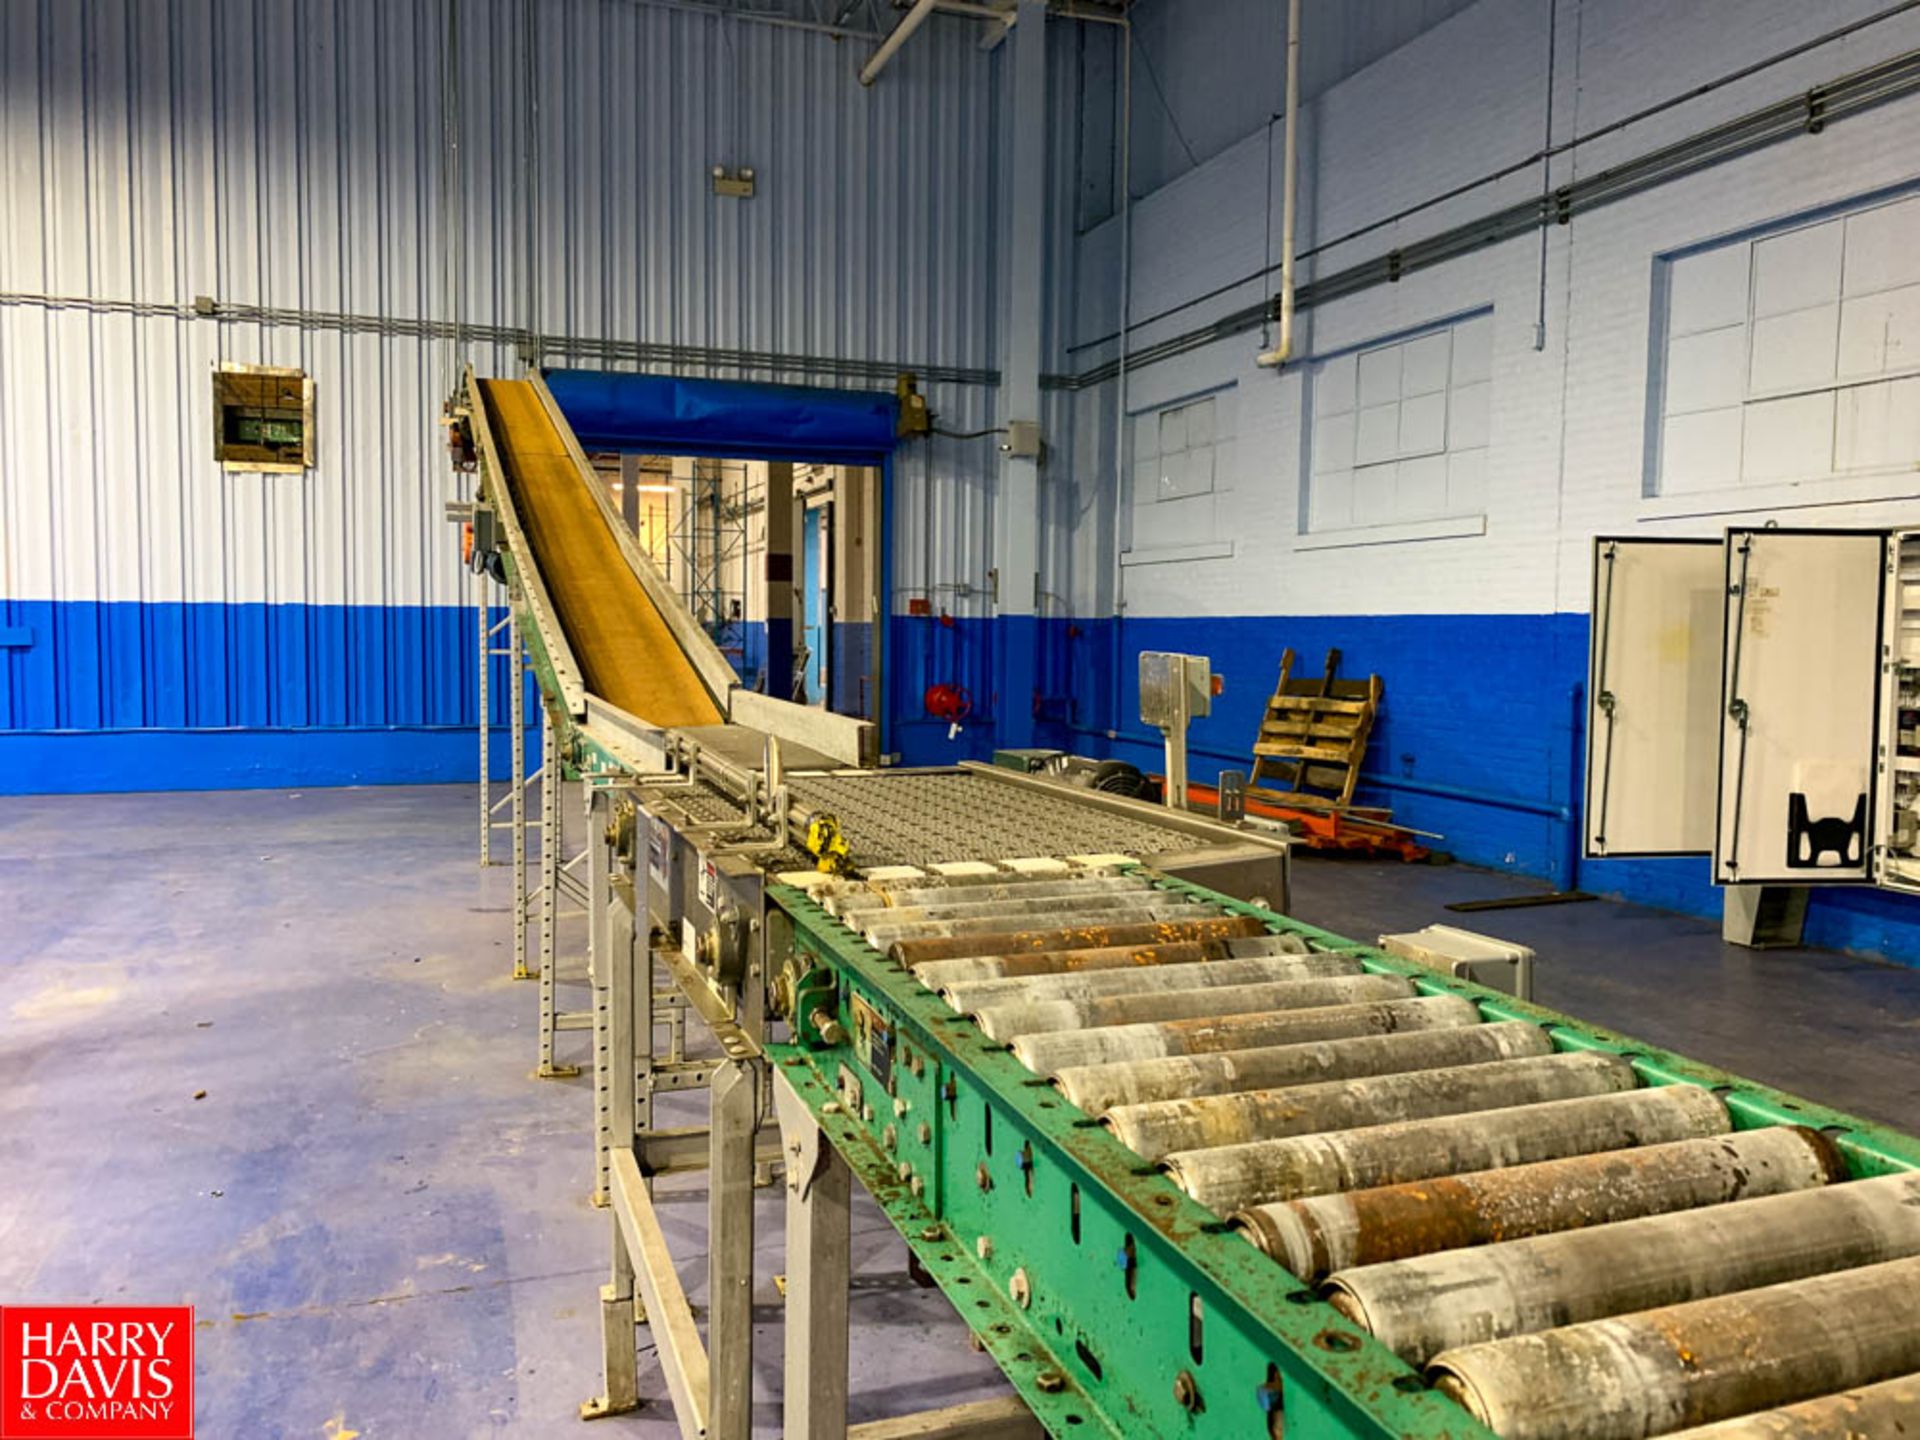 Approx.. 100' X 15" Wide Inclined Power Belt Conveyor with 90 Deg Turns and Drives to Palletizer